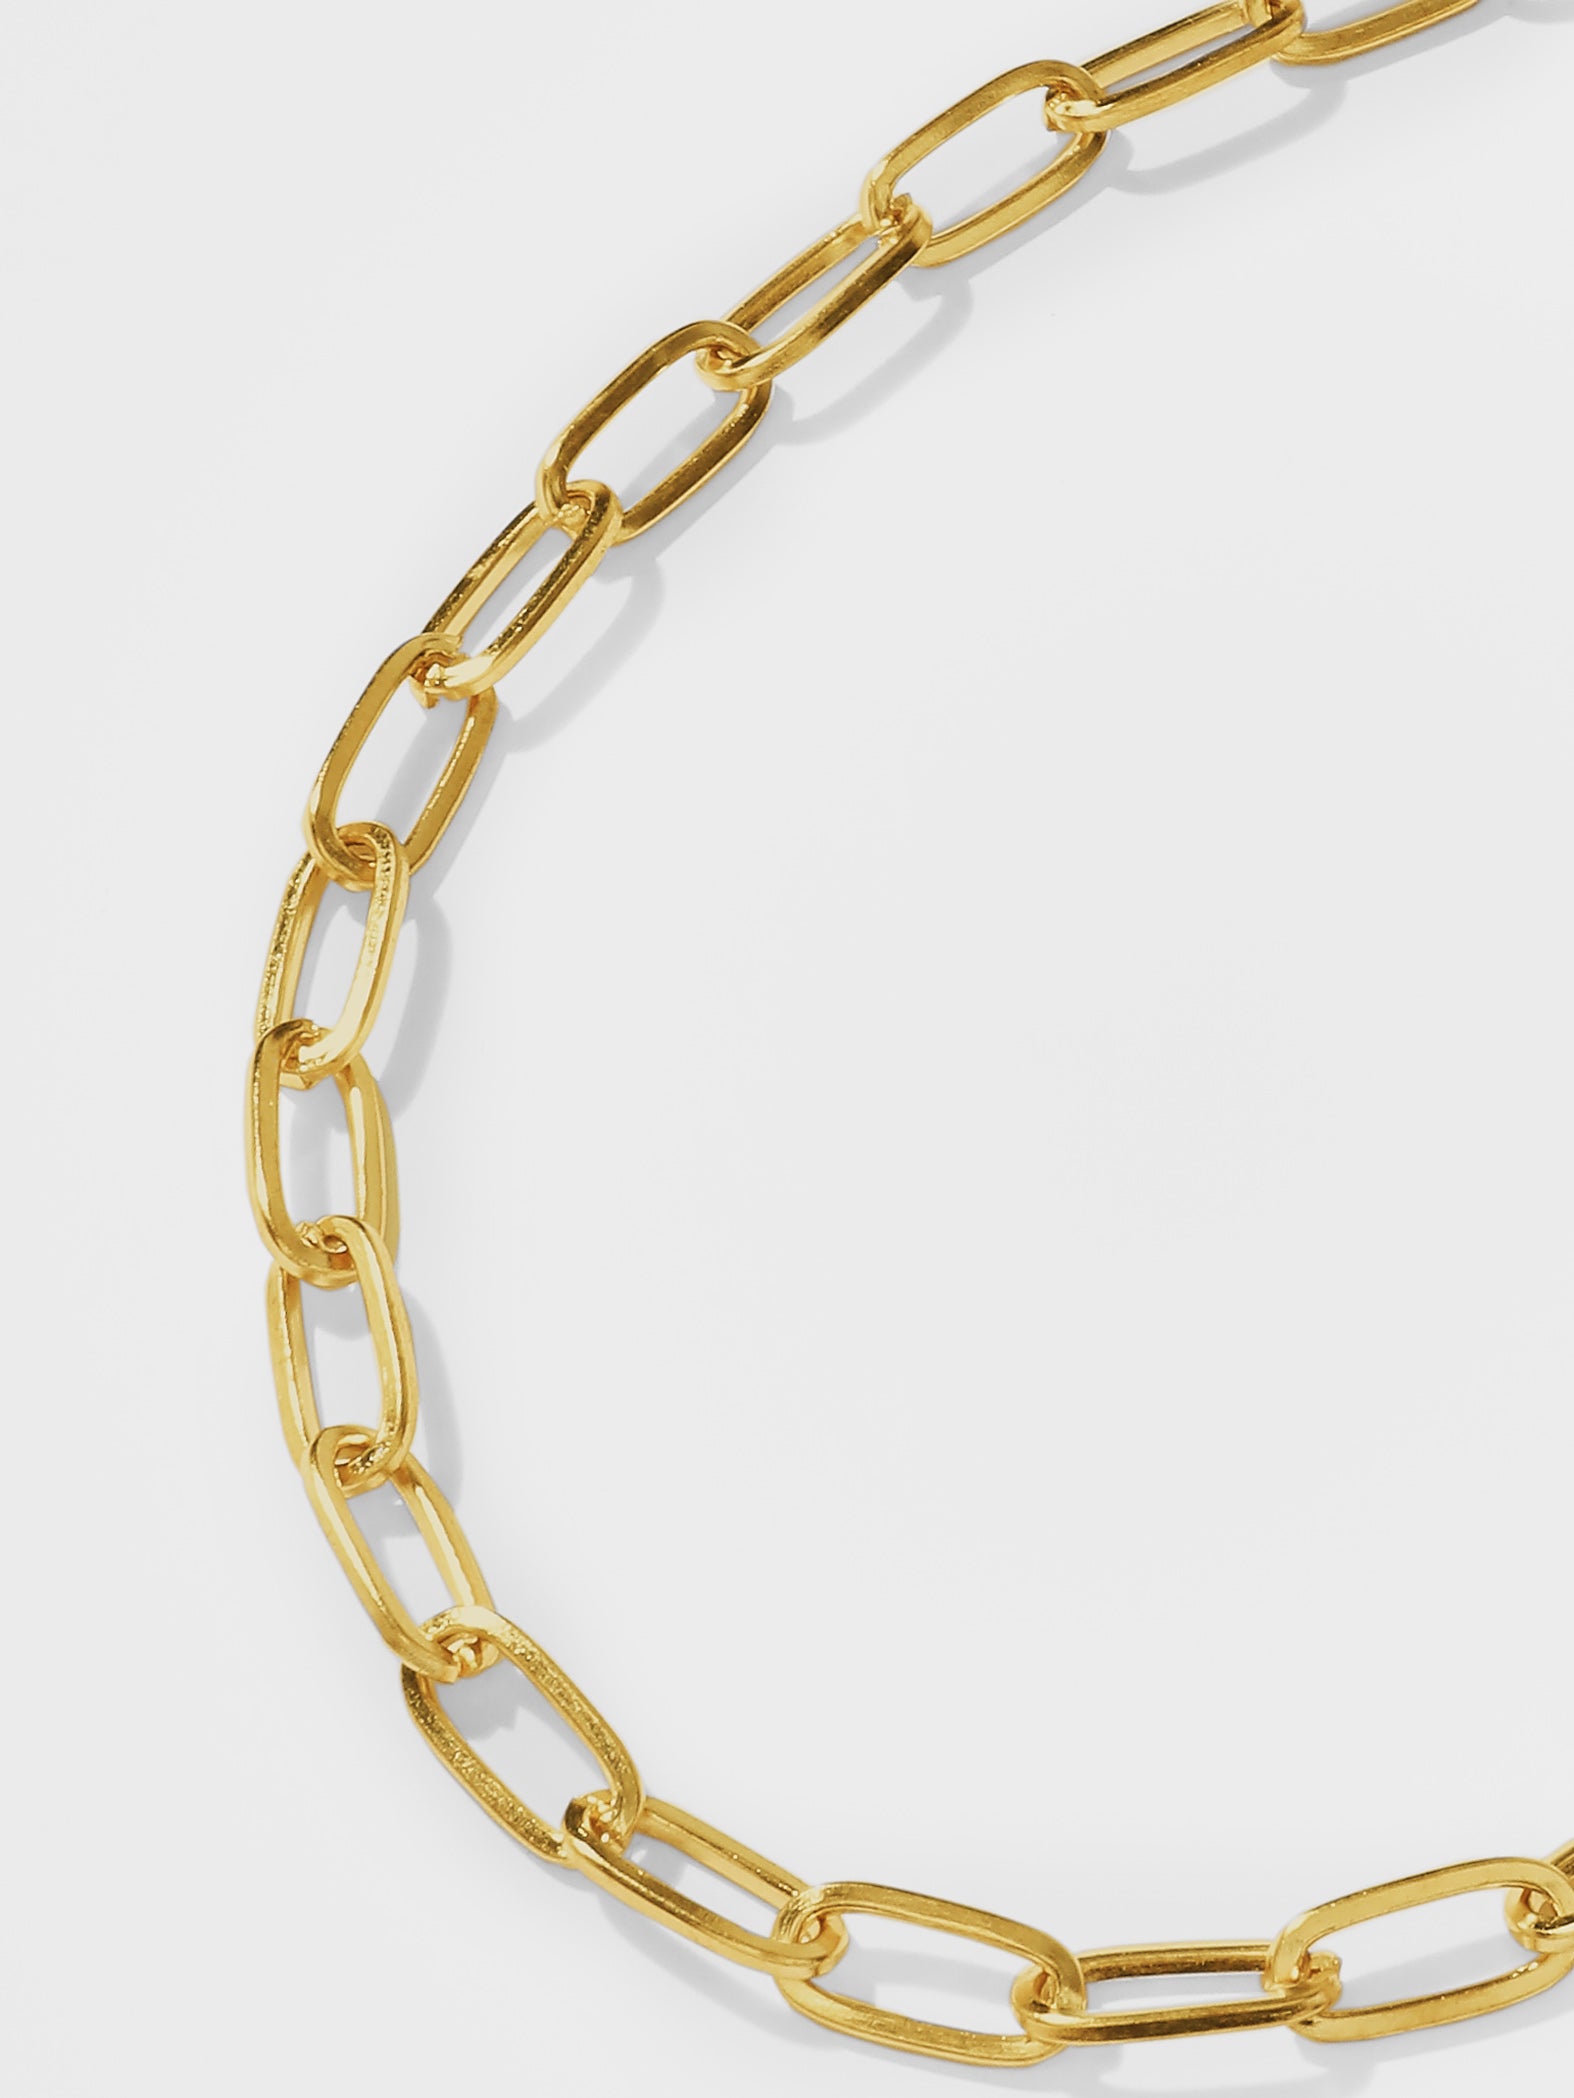 Gold Linked Chain Necklace